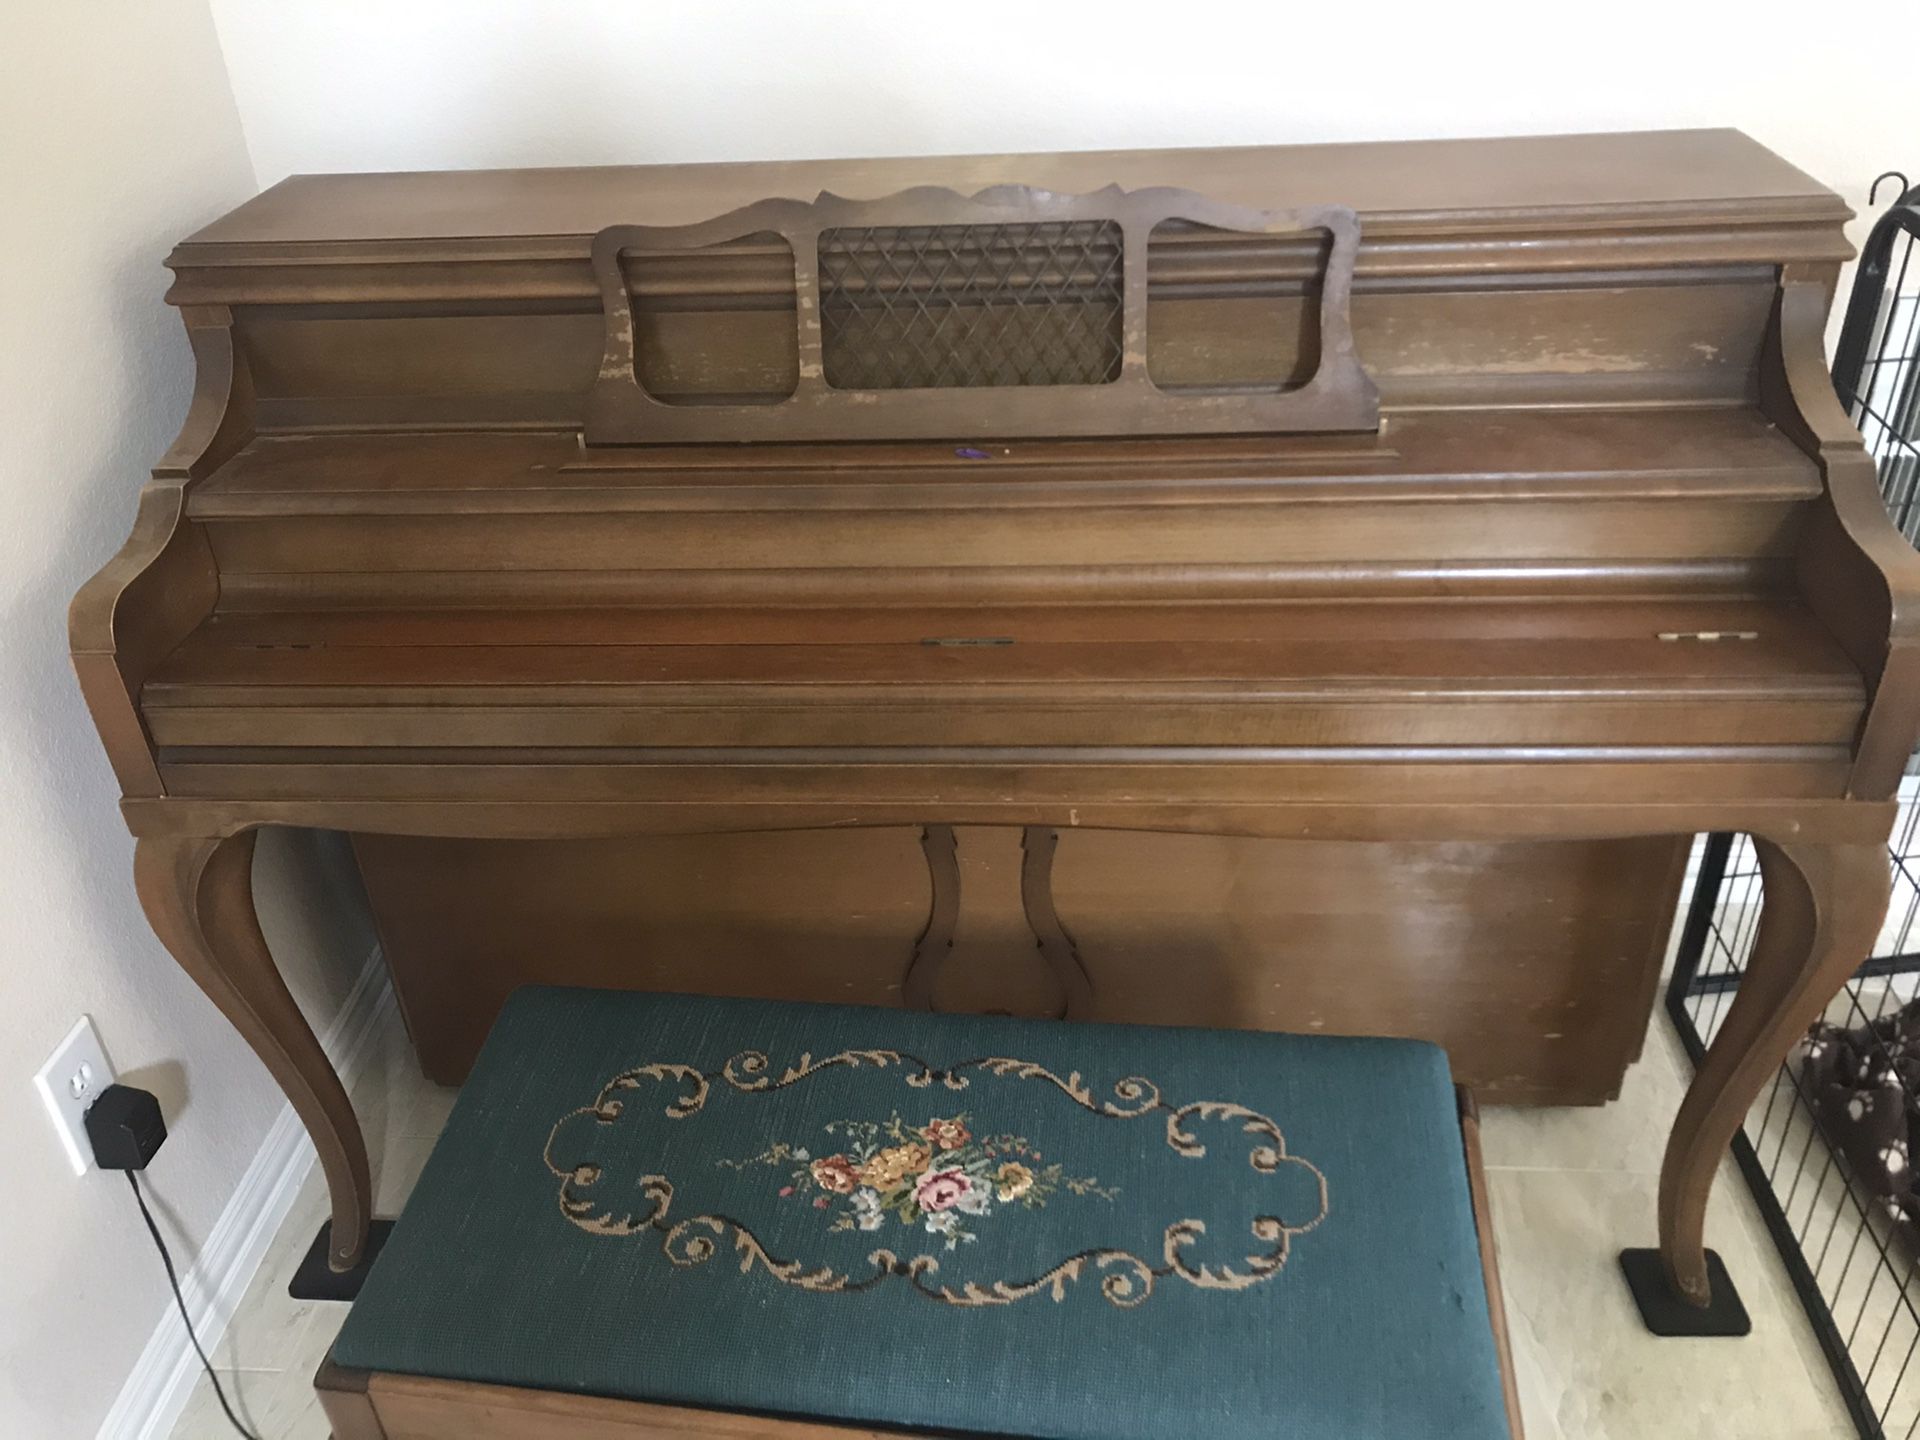 Piano for sale $350 or best offer